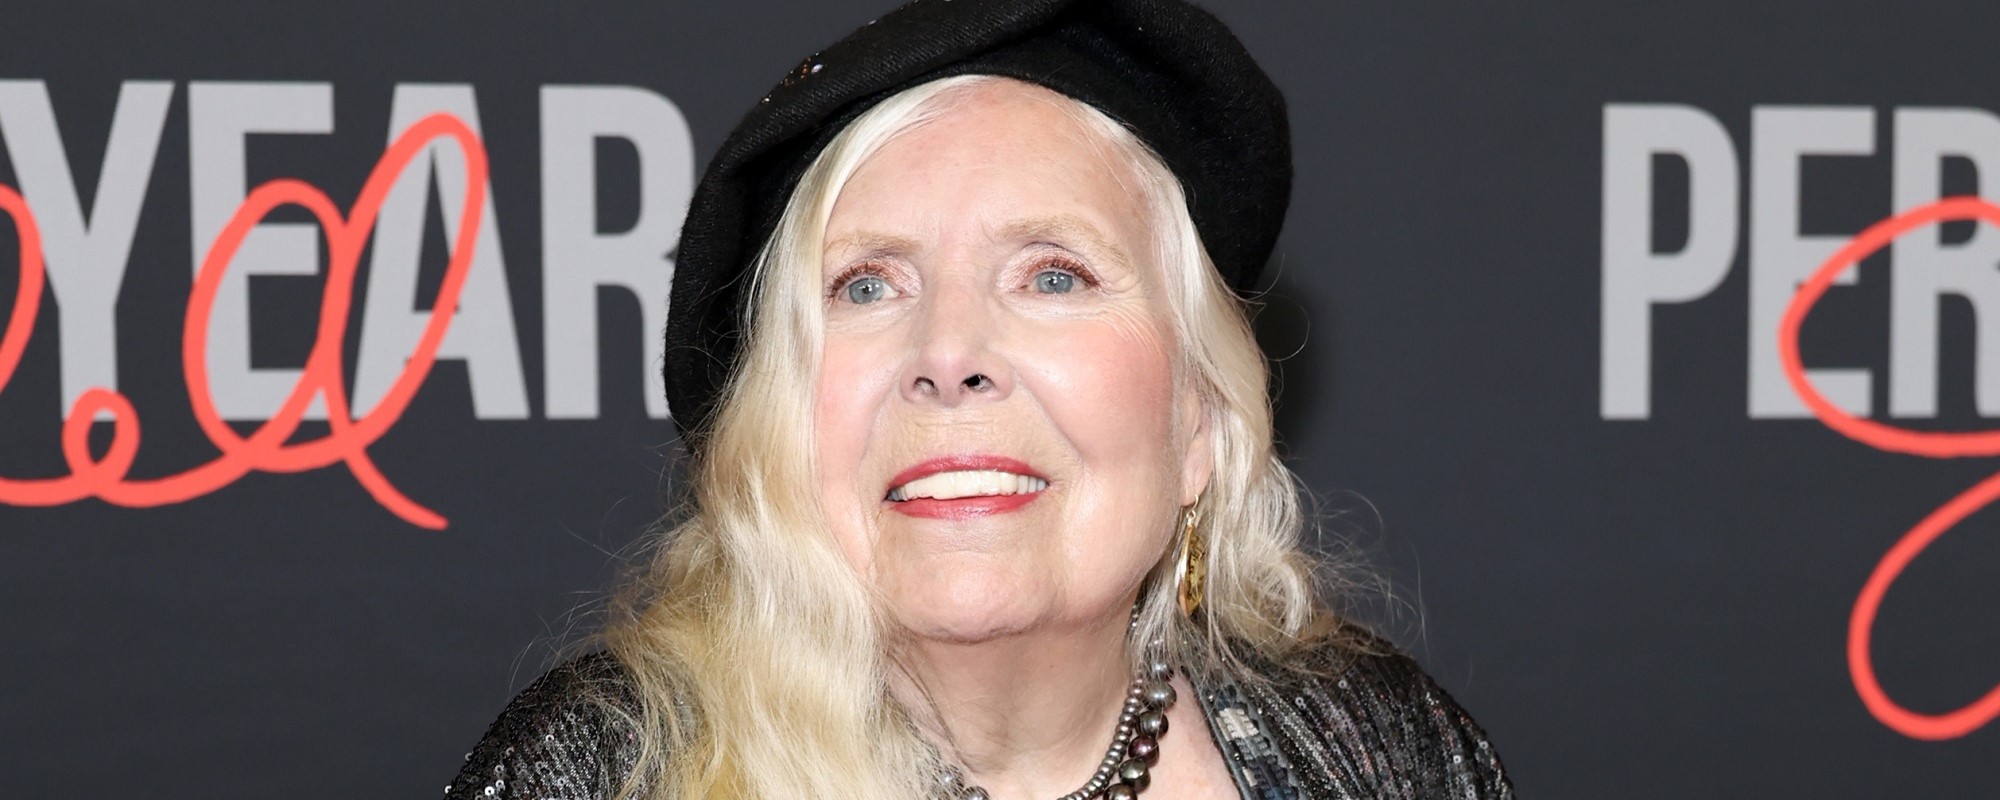 Joni Mitchell to Play “Joni Jam” Concert at Hollywood Bowl—Her First L.A. Show in 24 Years